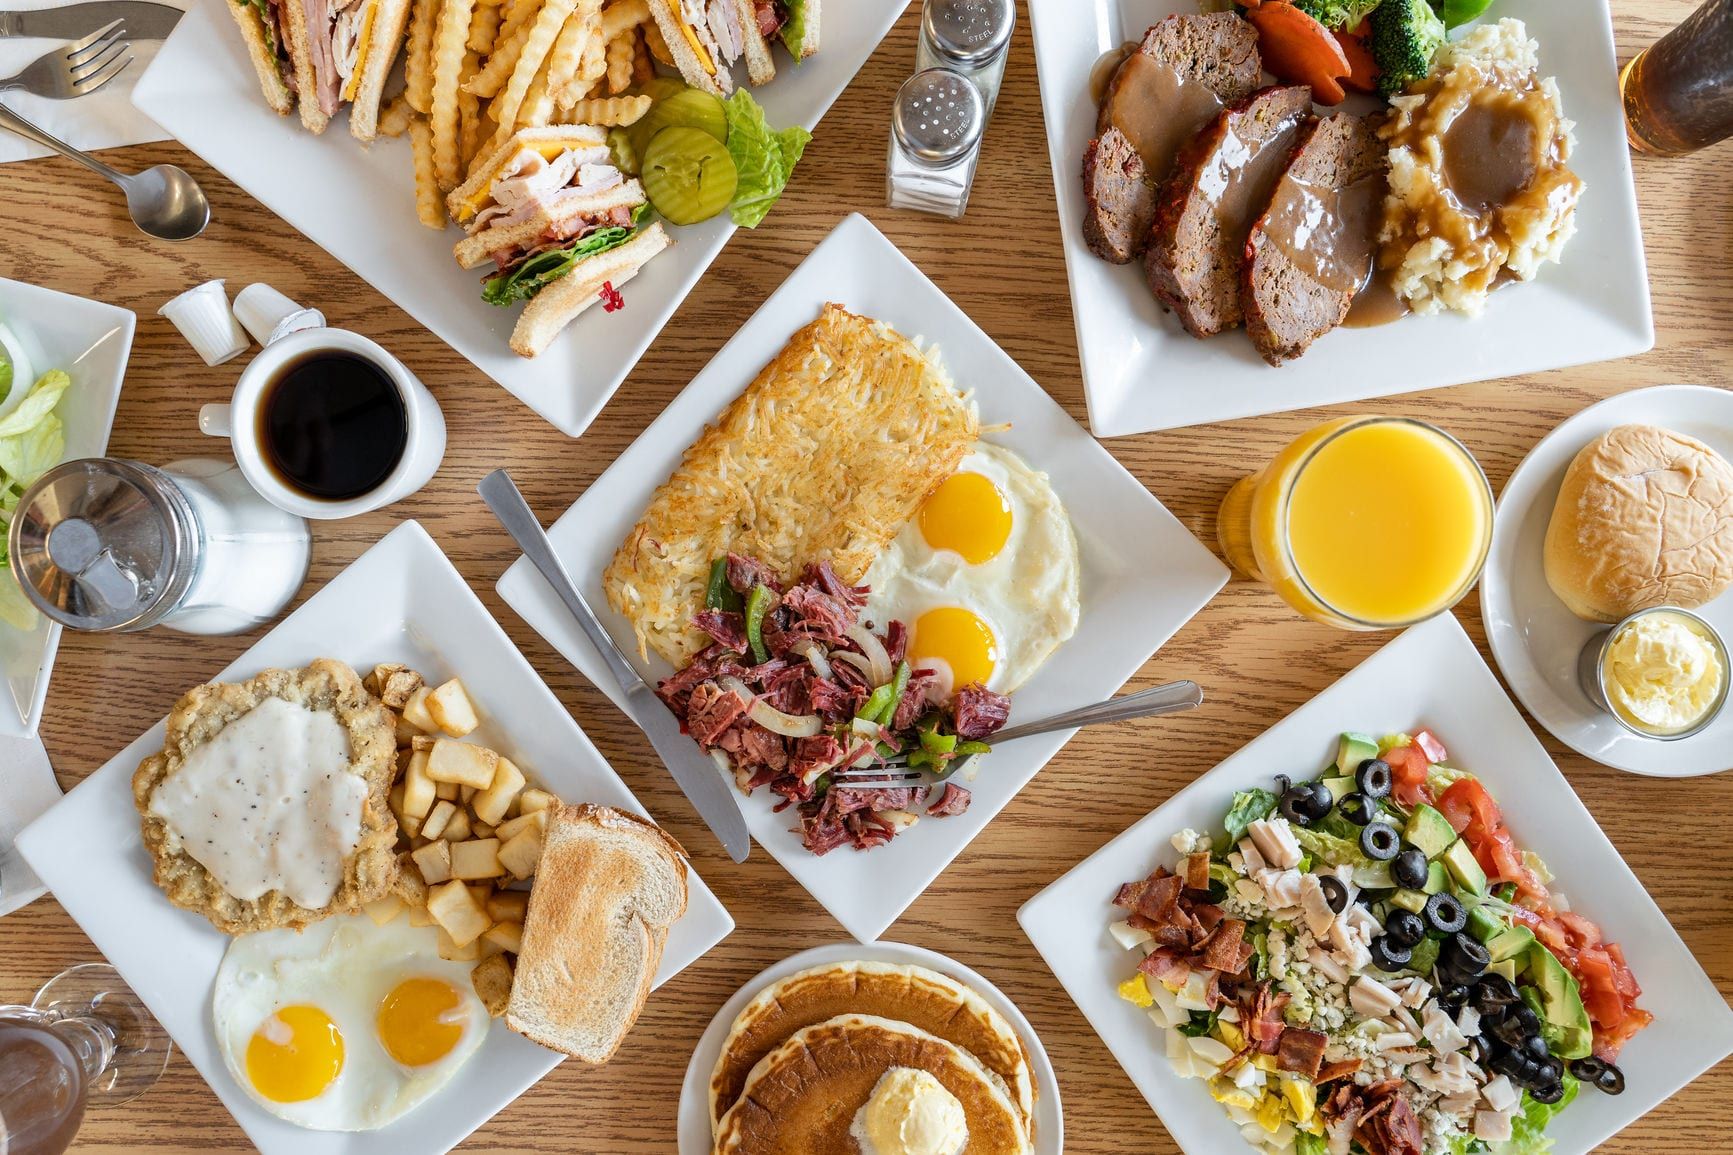 The 10 Best Restaurants Catering Hearty Breakfasts in Tampa - Lunch Rush